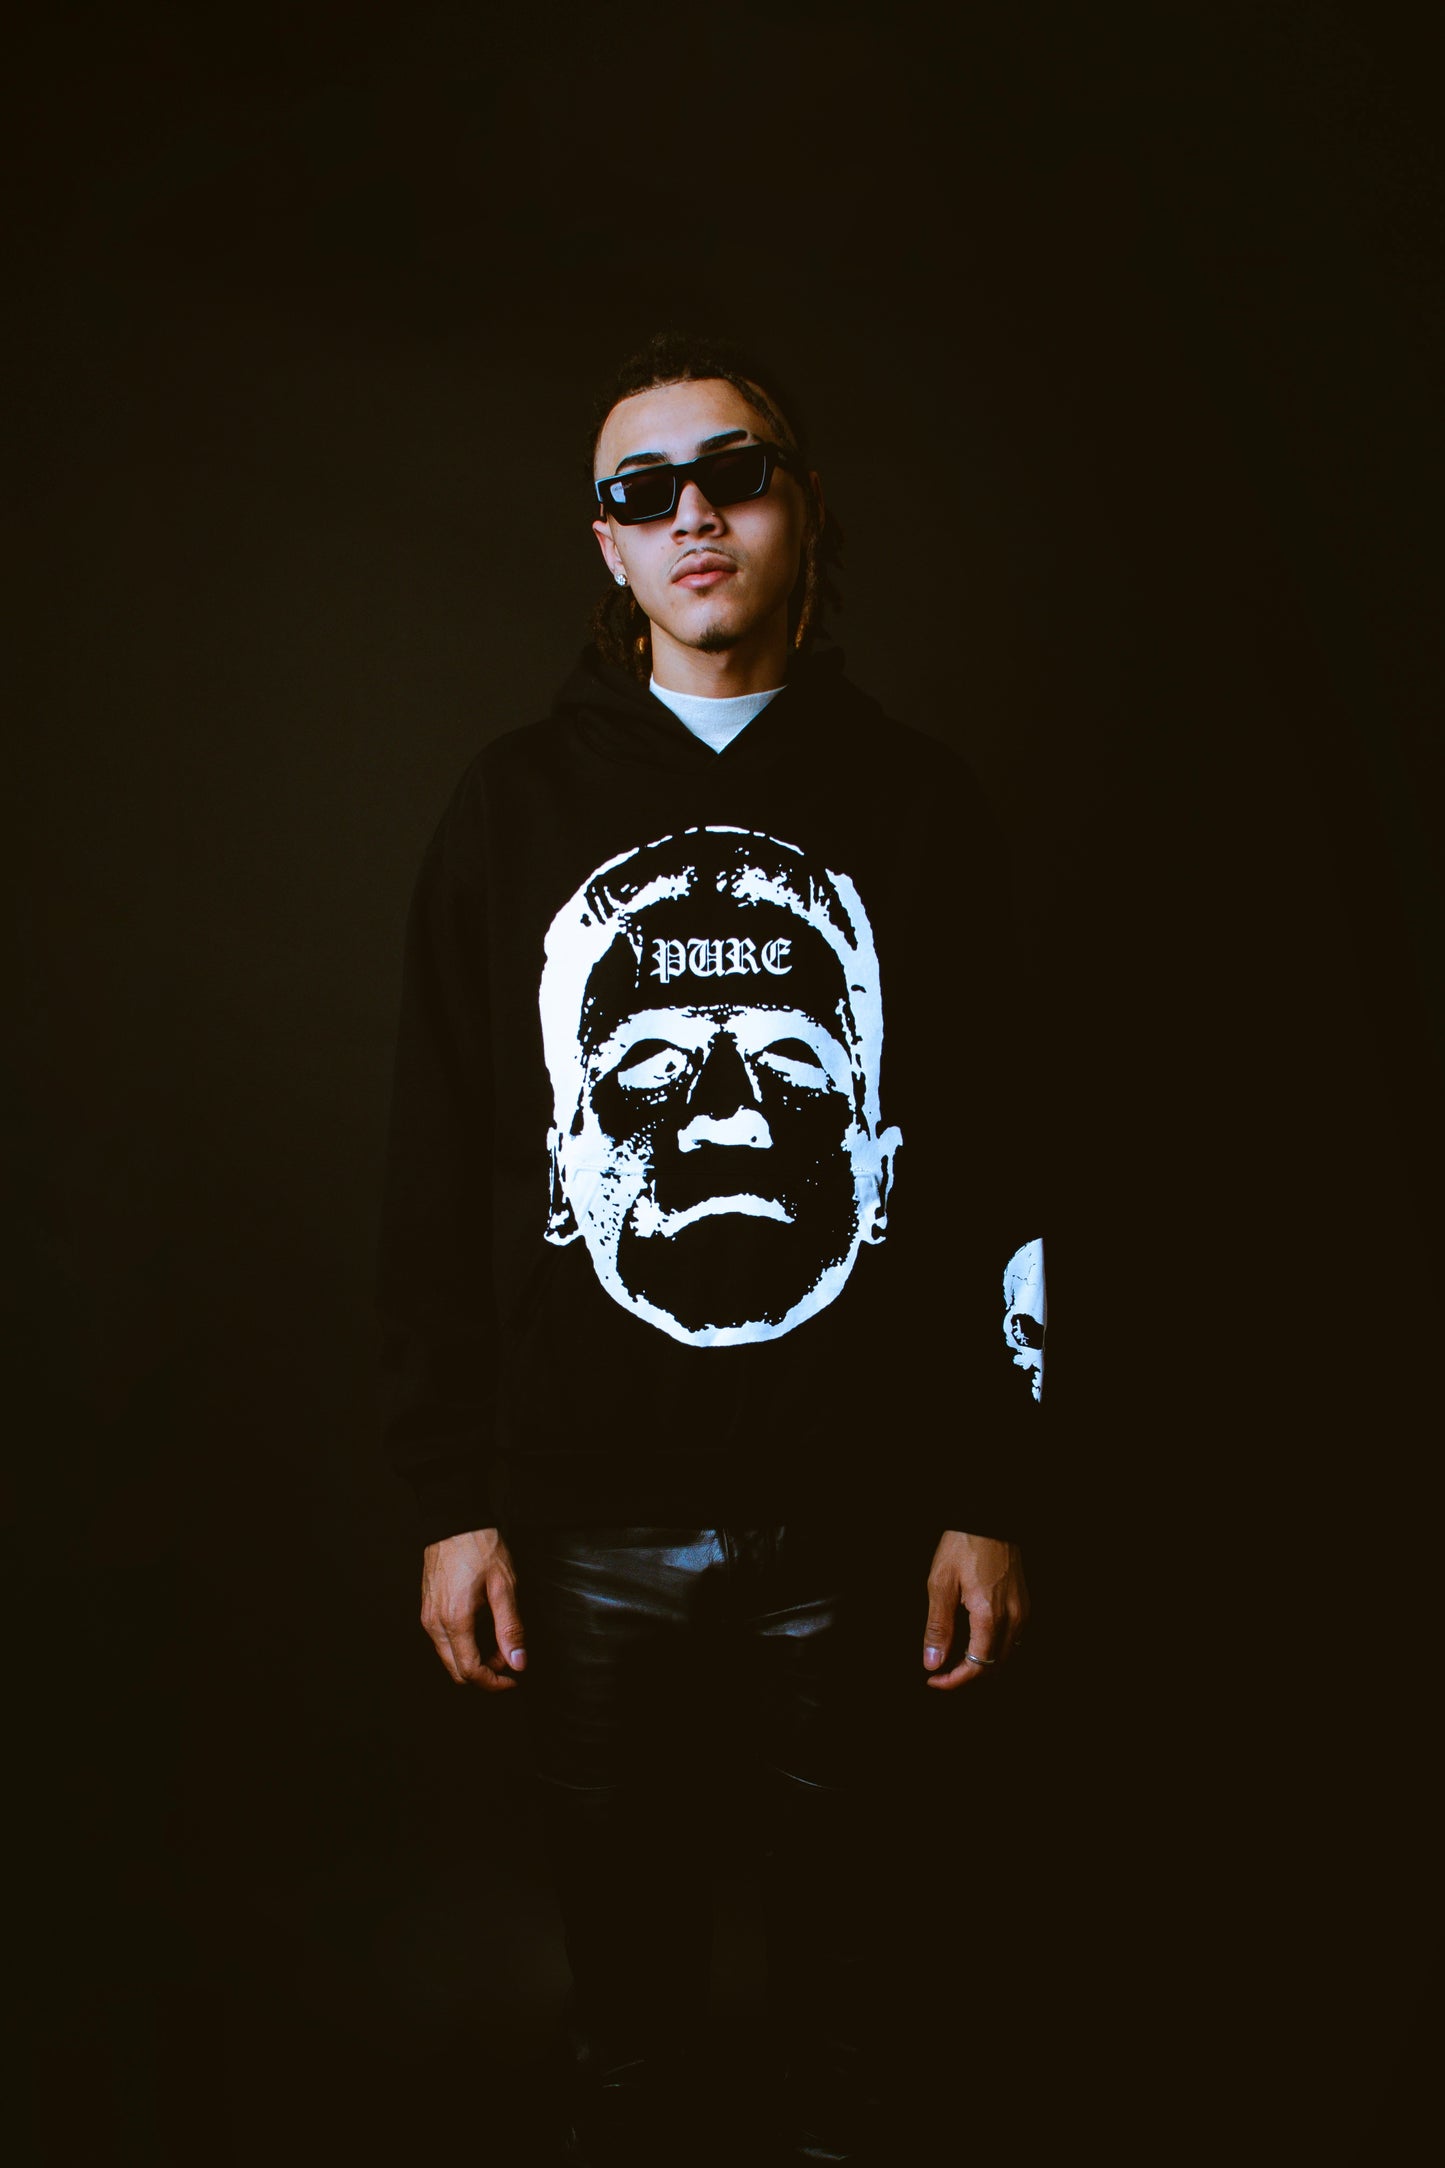 Pain is Pure "WE ARE ALL MONSTERS" Frankenstein Hoodie Black White